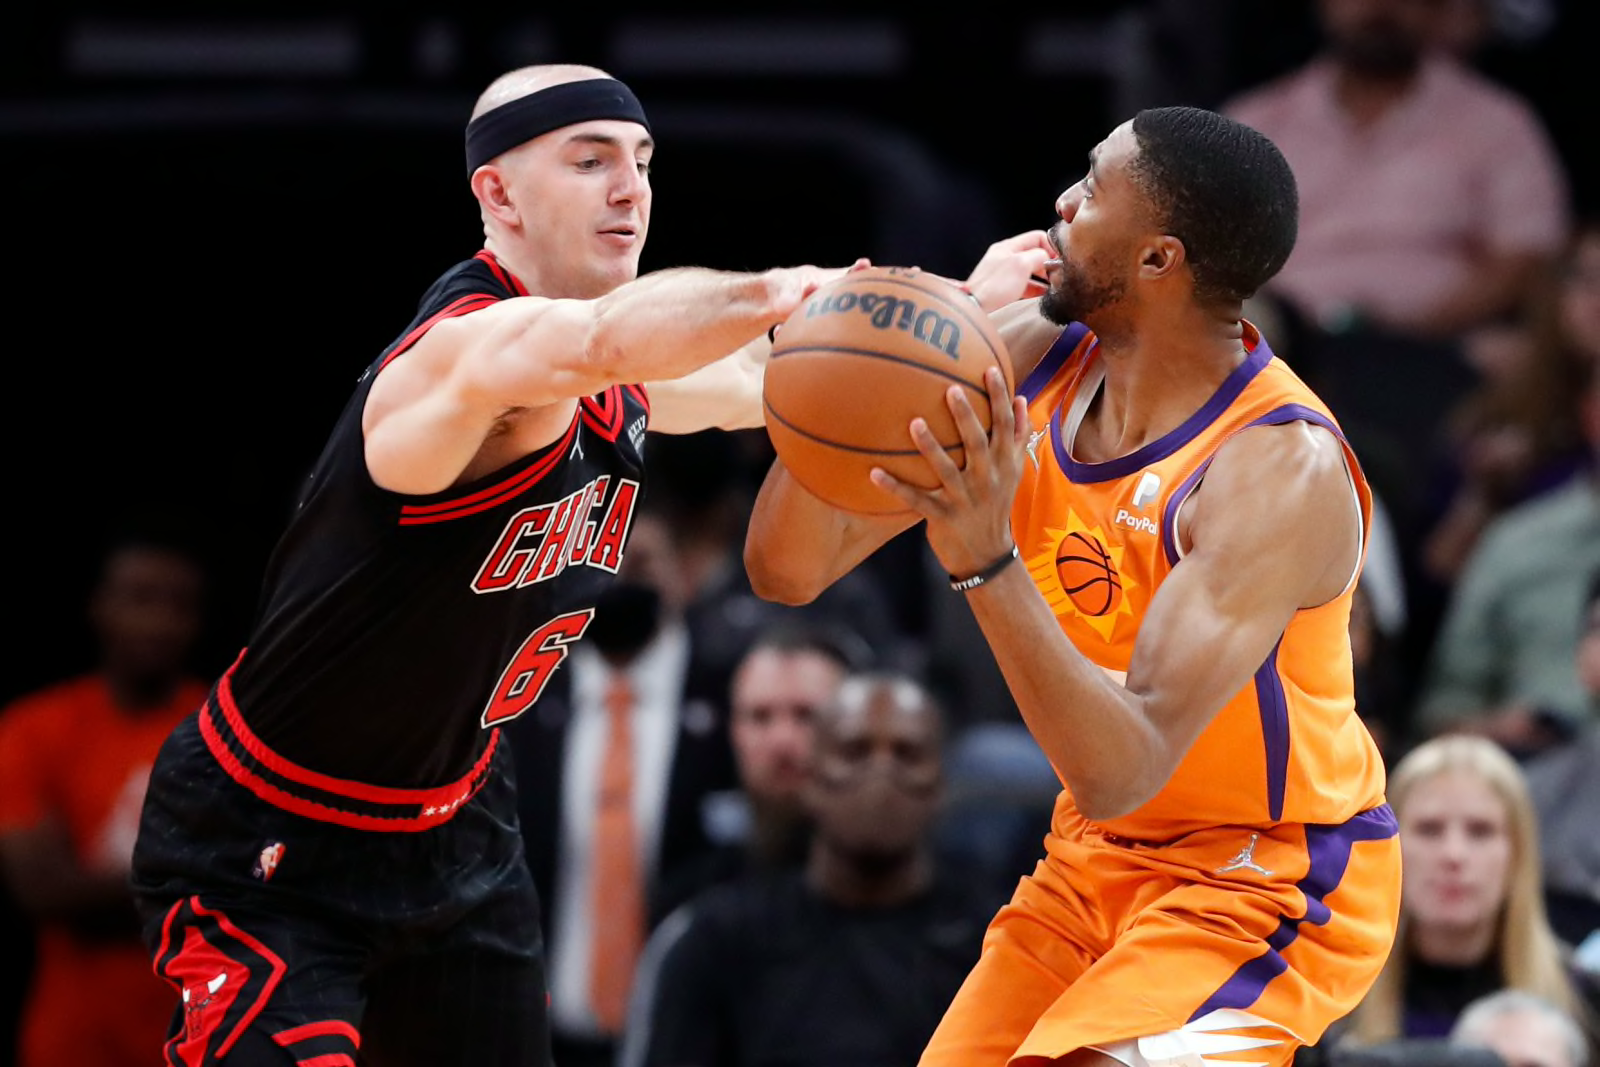 Bulls' Alex Caruso put on defensive clinic in play-in victory over